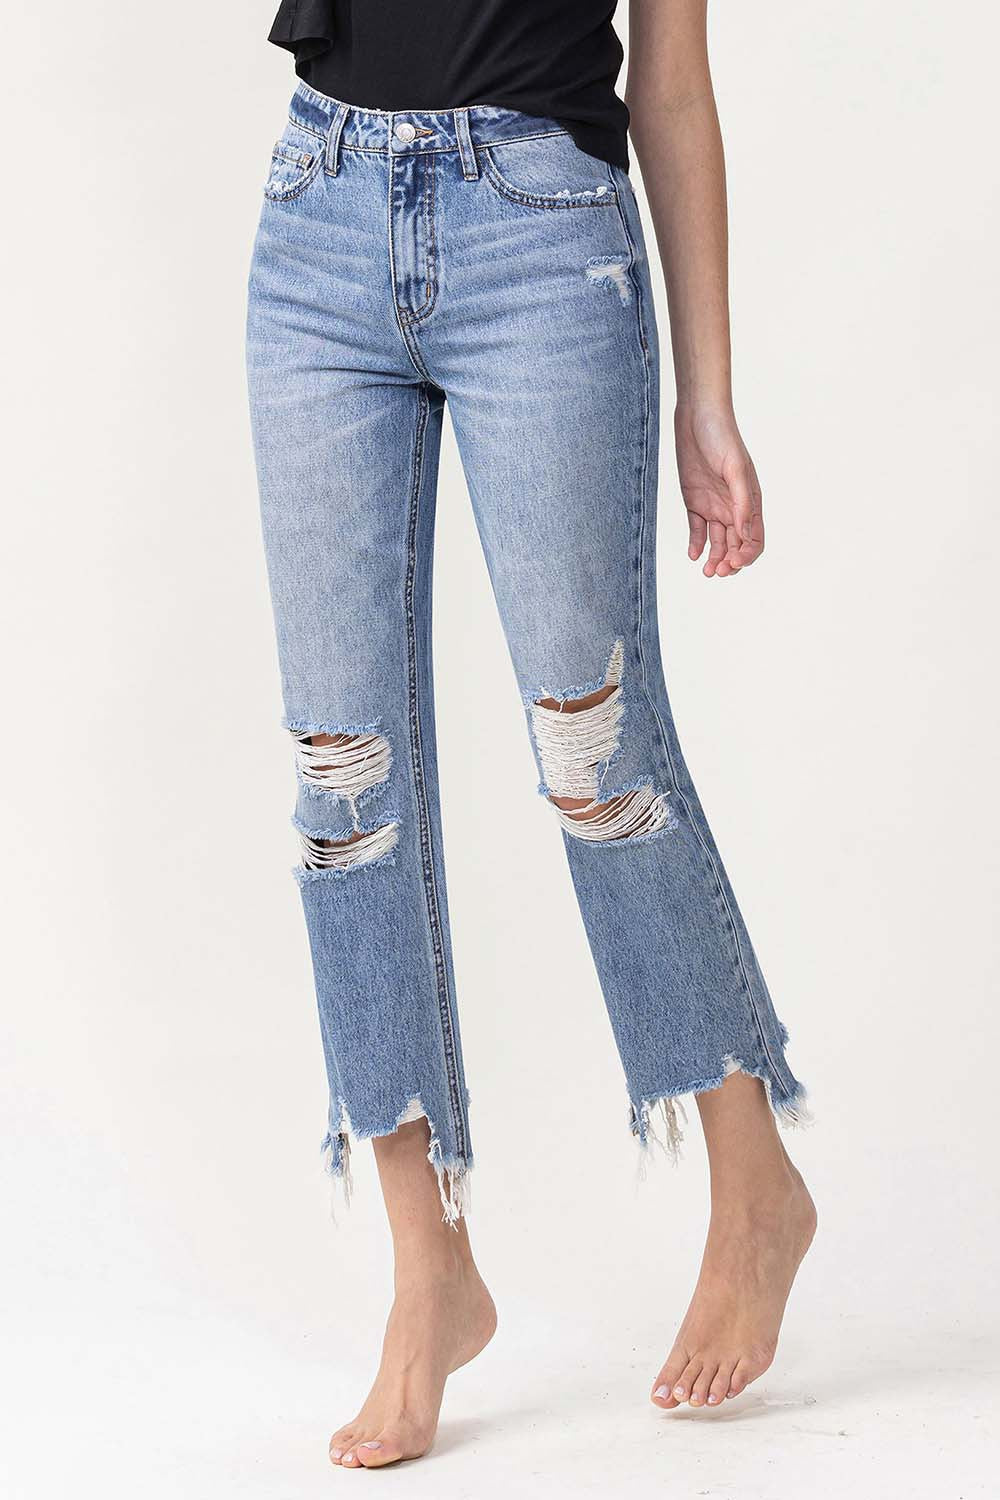 Lovervet High Rise Distressed Straight Jeans-Denim-Inspired by Justeen-Women's Clothing Boutique in Chicago, Illinois